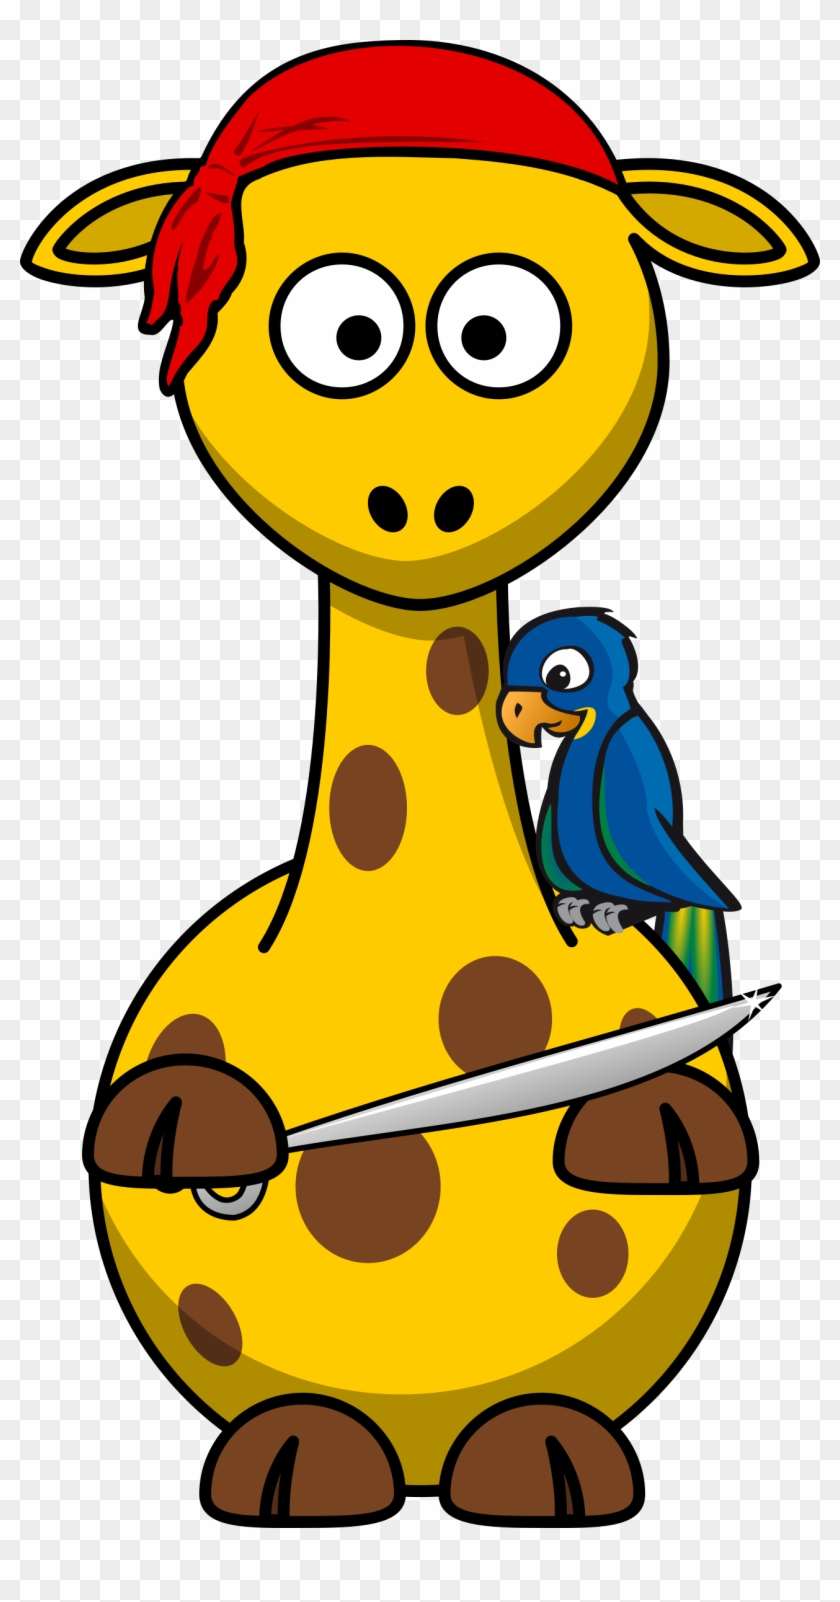 This Free Icons Png Design Of Giraffe Pirate Clipart #457884